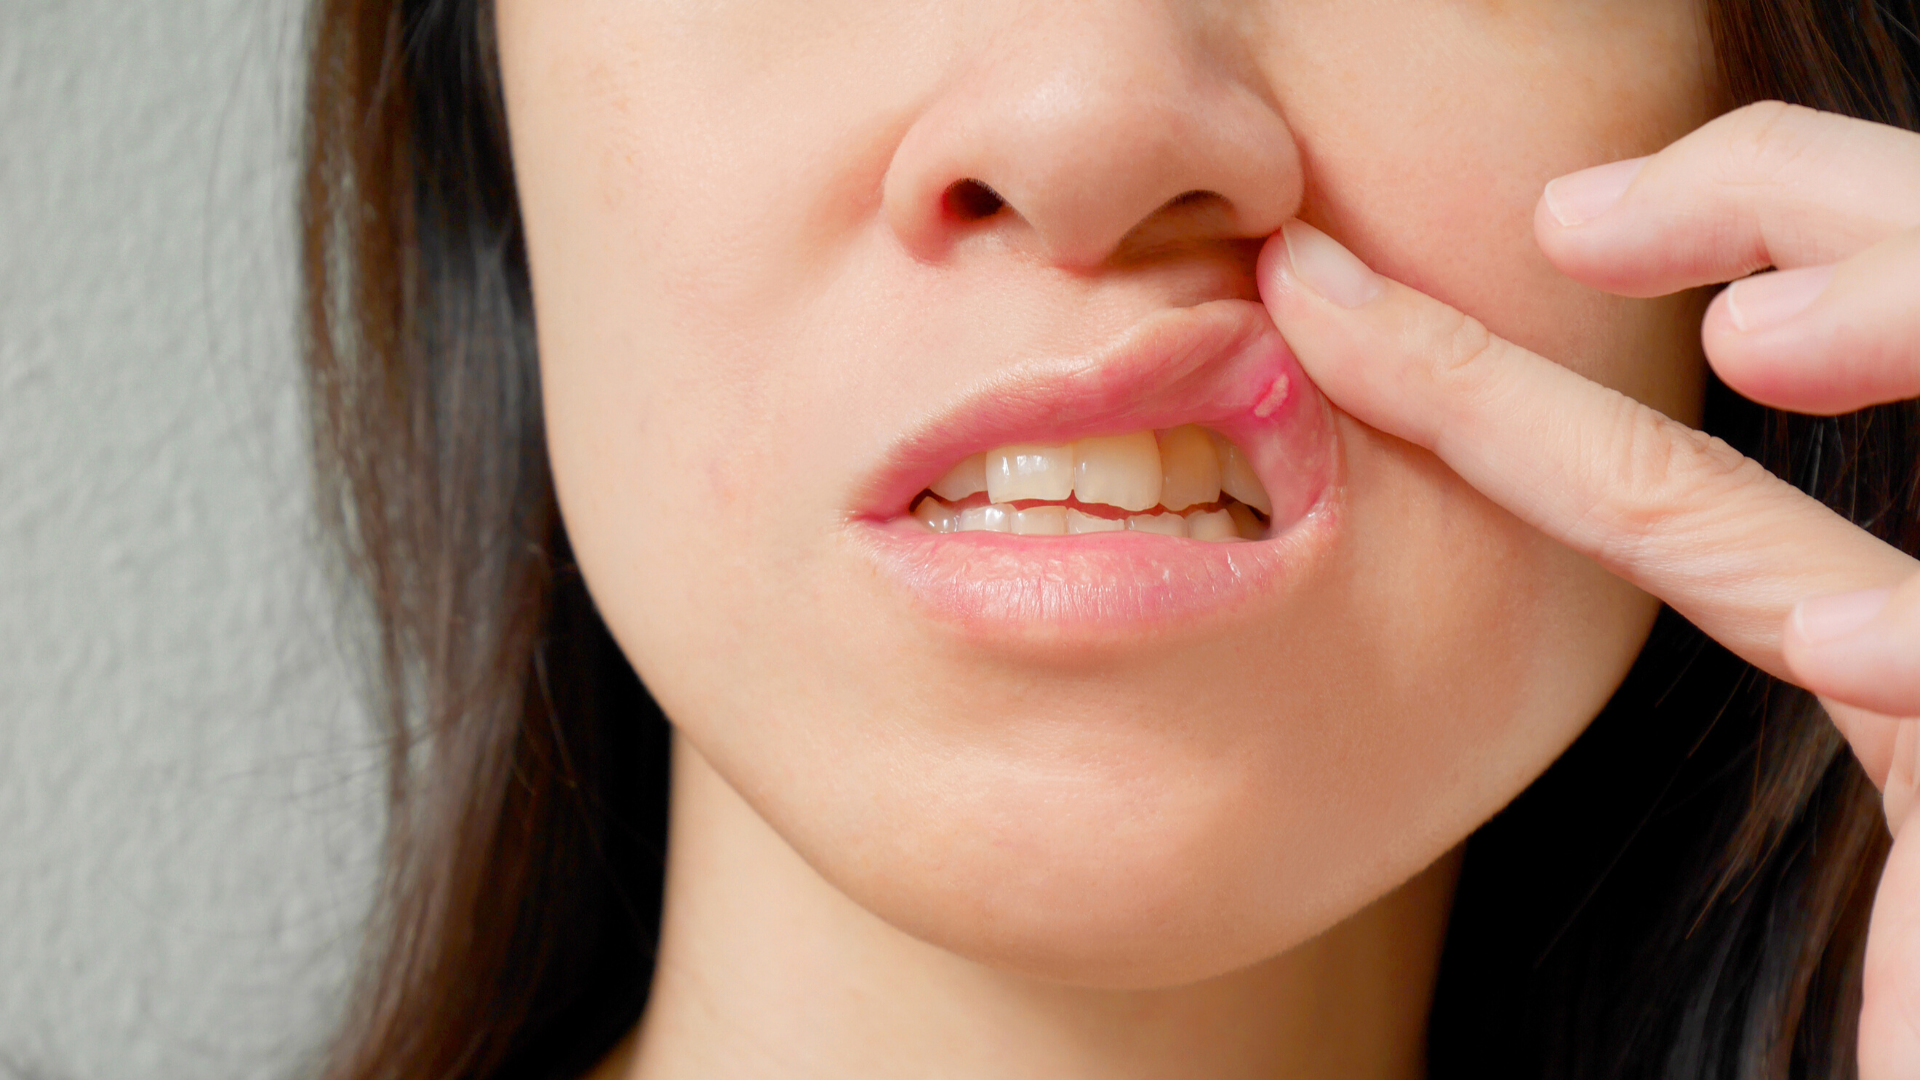 Women showing her canker sore on her upper lips